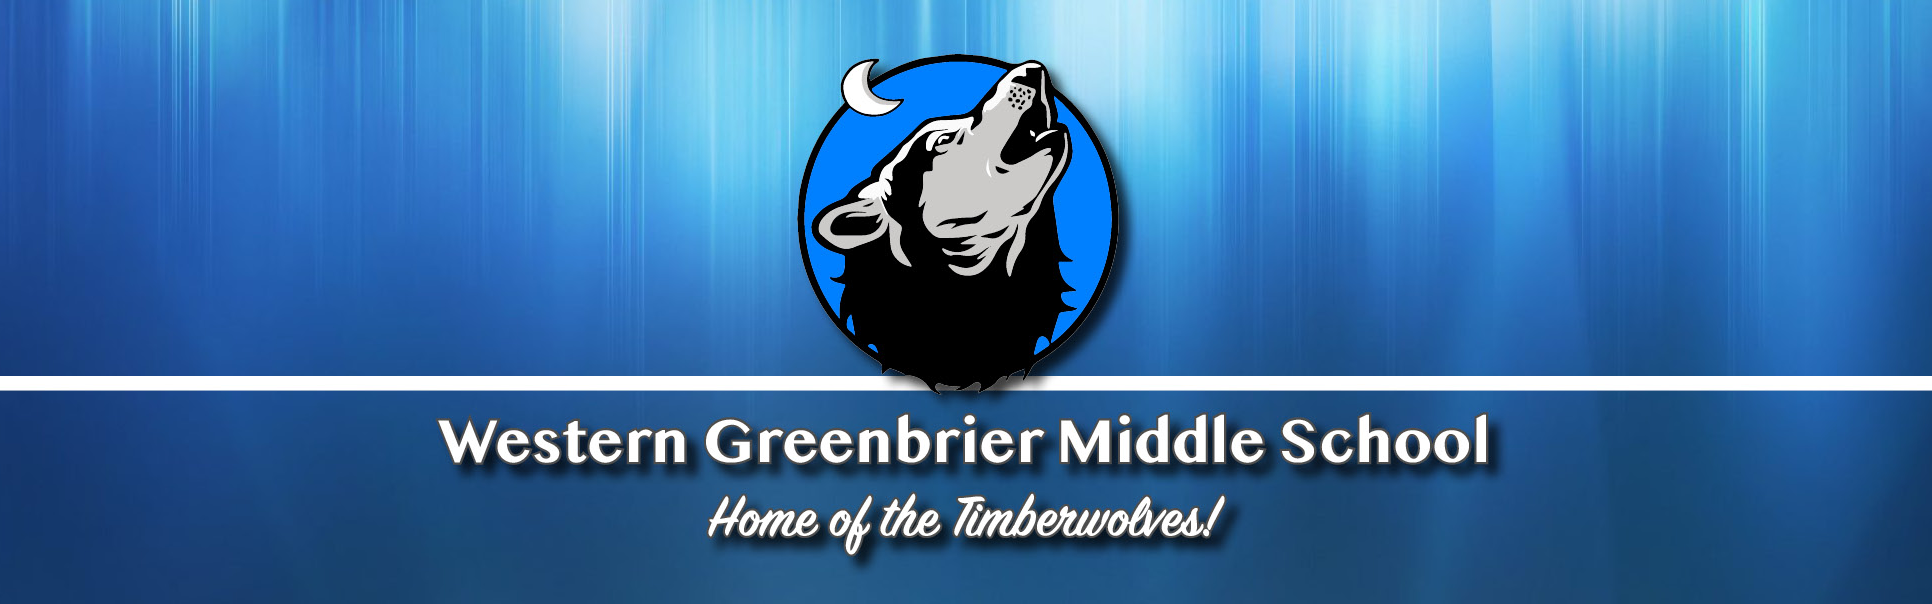 western greenbrier middle